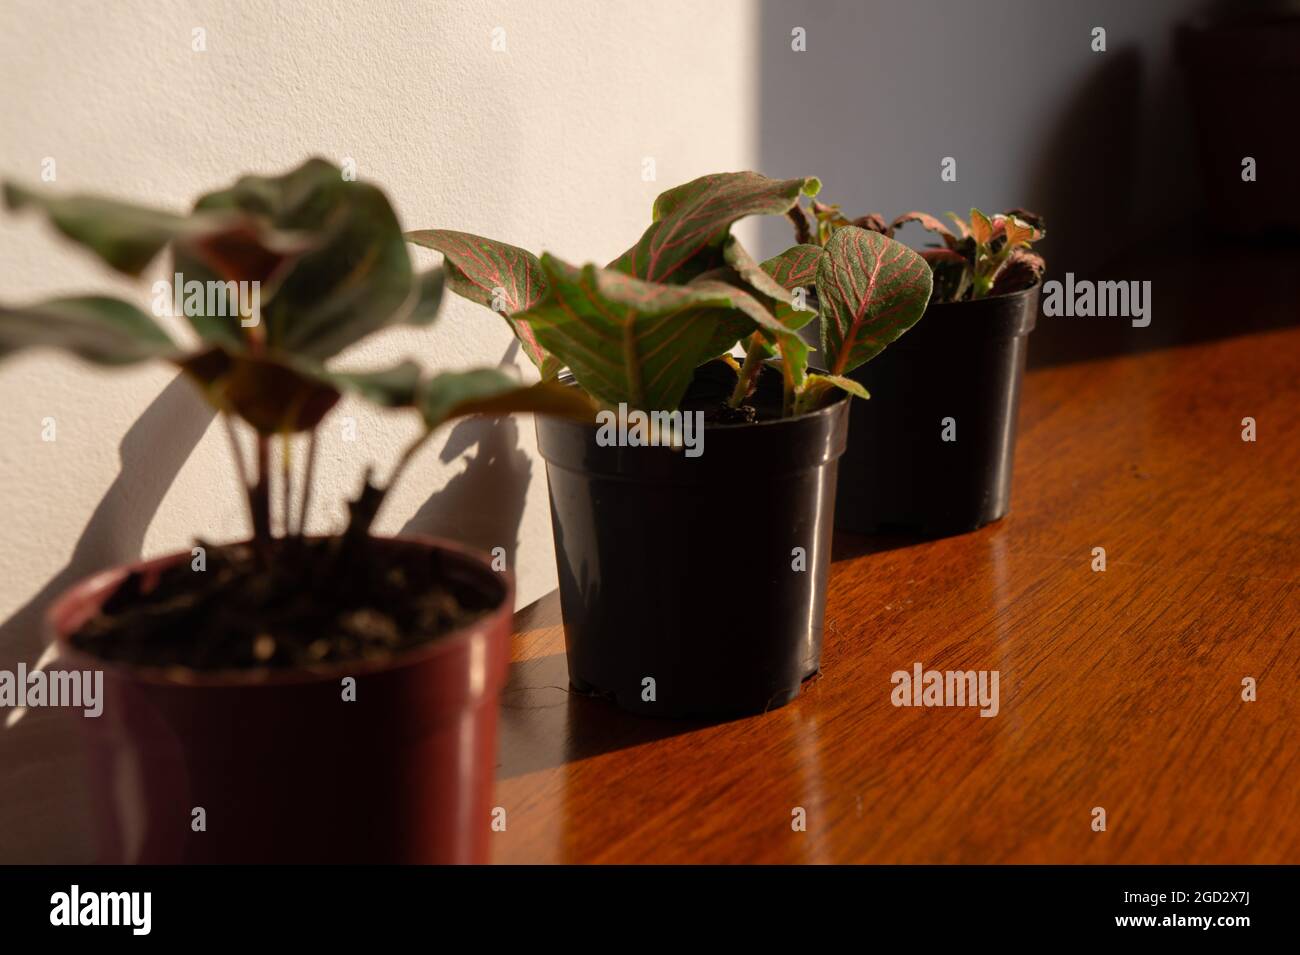 Three aligned houseplants, on top of a wooden table, receiving direct sunlight natural light. Plants such as maranta and fittonia. Stock Photo